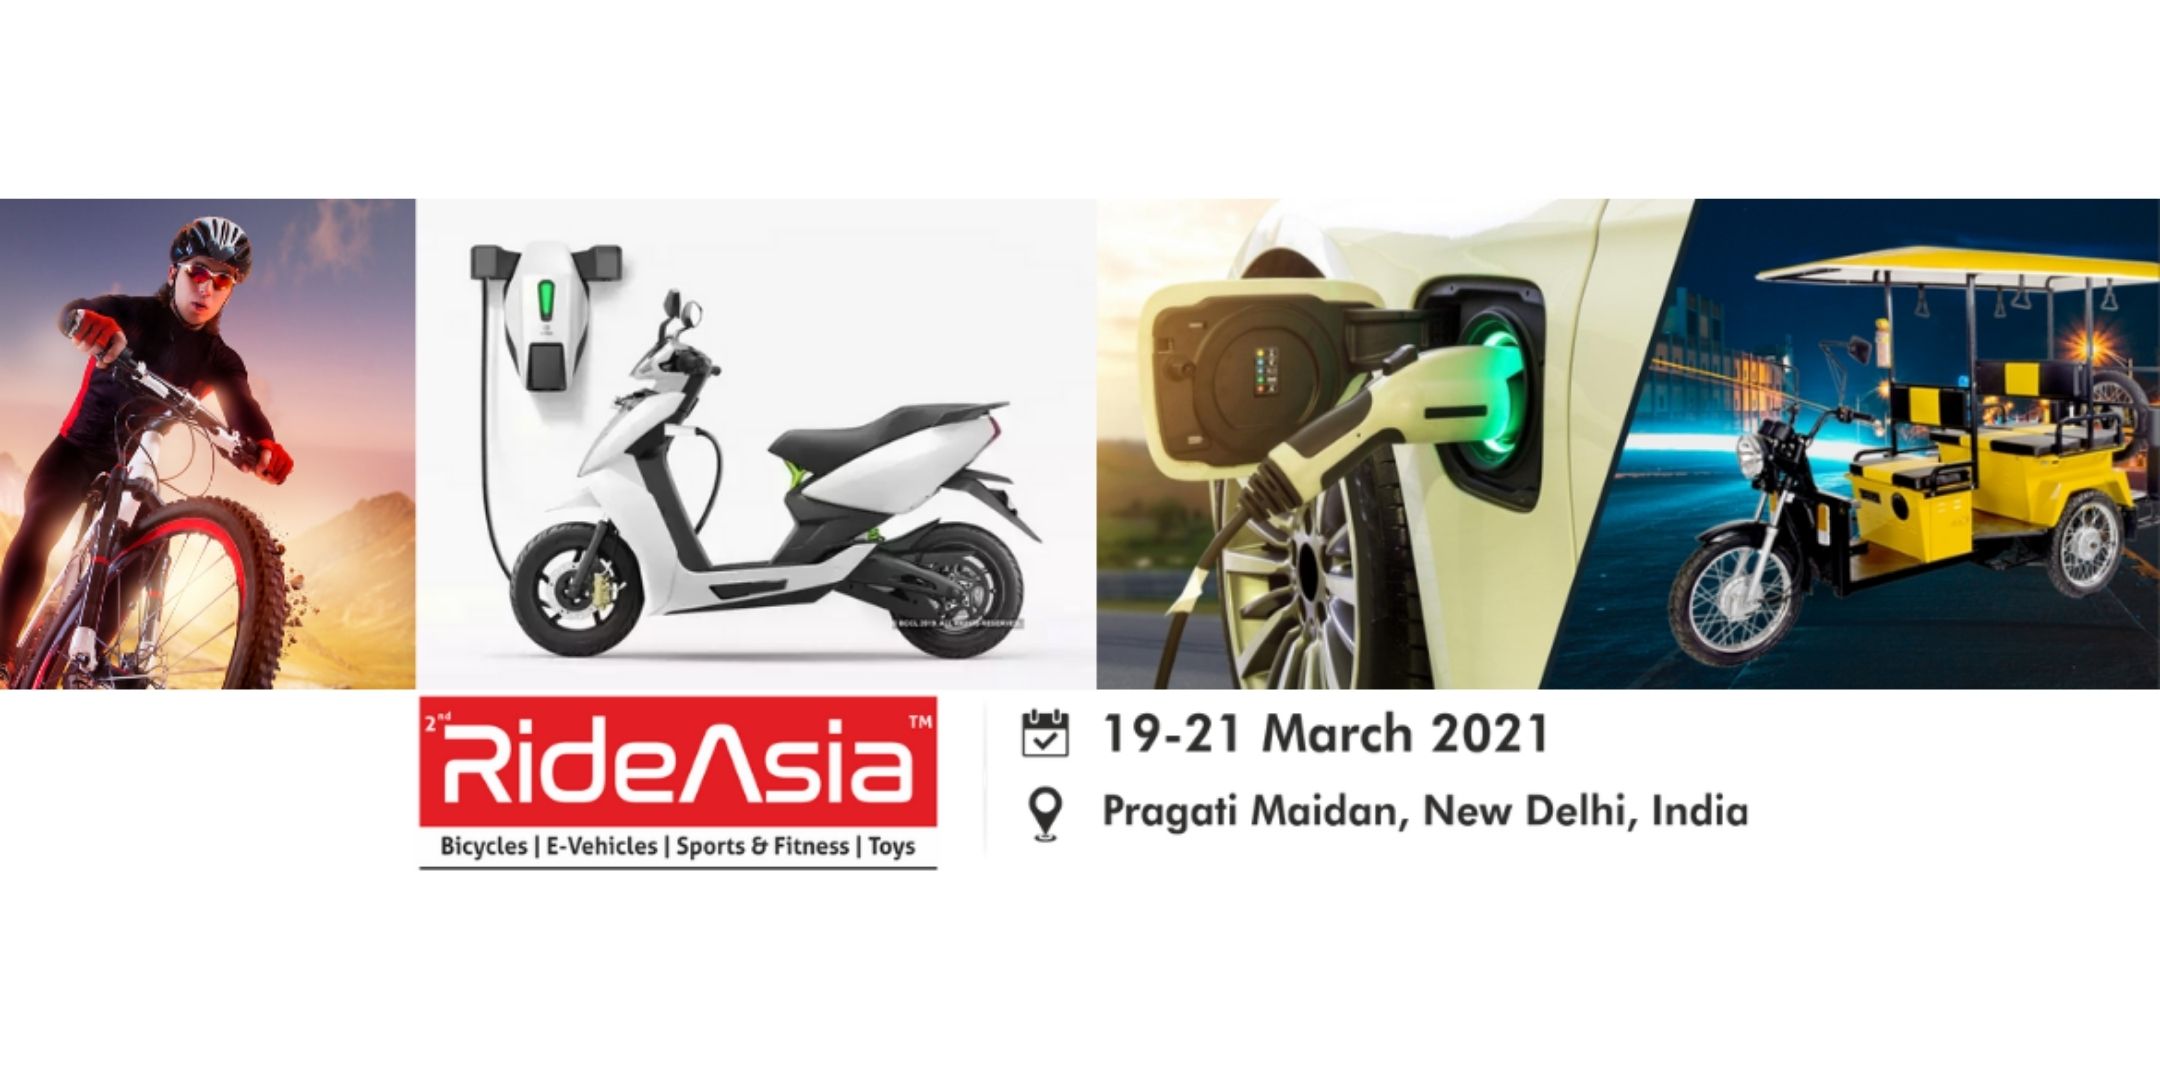 RIDEASIA 2021 Bicycle, Electric-Vehicles, Sports Fitness & Ride-Ons, New Delhi, Delhi, India